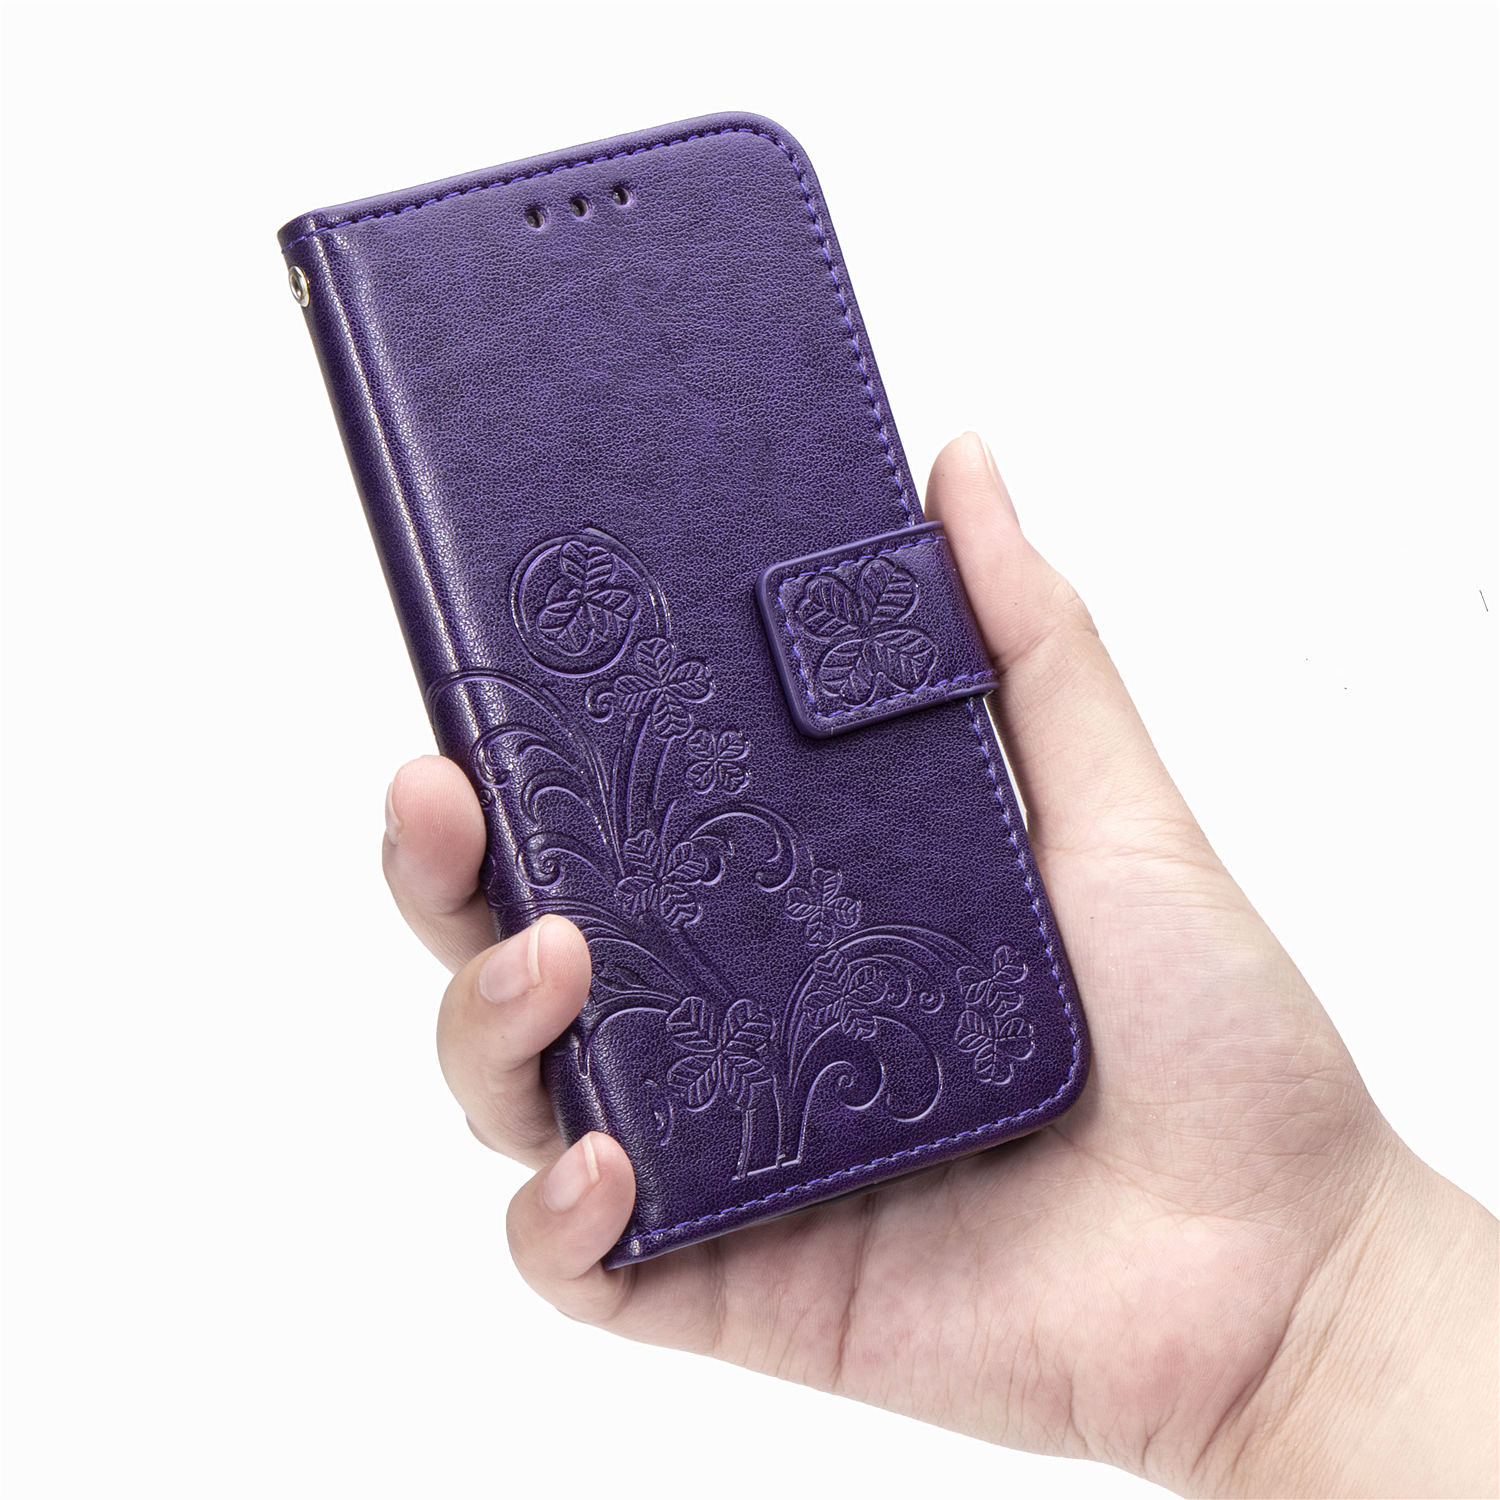 casing OPPO R11 S Plus A83 A1  A5 A3 S AX5 R15 Neo F9 Pro A7 X U1 R17 PU Phone case four leaf clover flower Bumper Flip Leather Protective Support Cover Magnetic Wallet card slot blue pink gray purple red